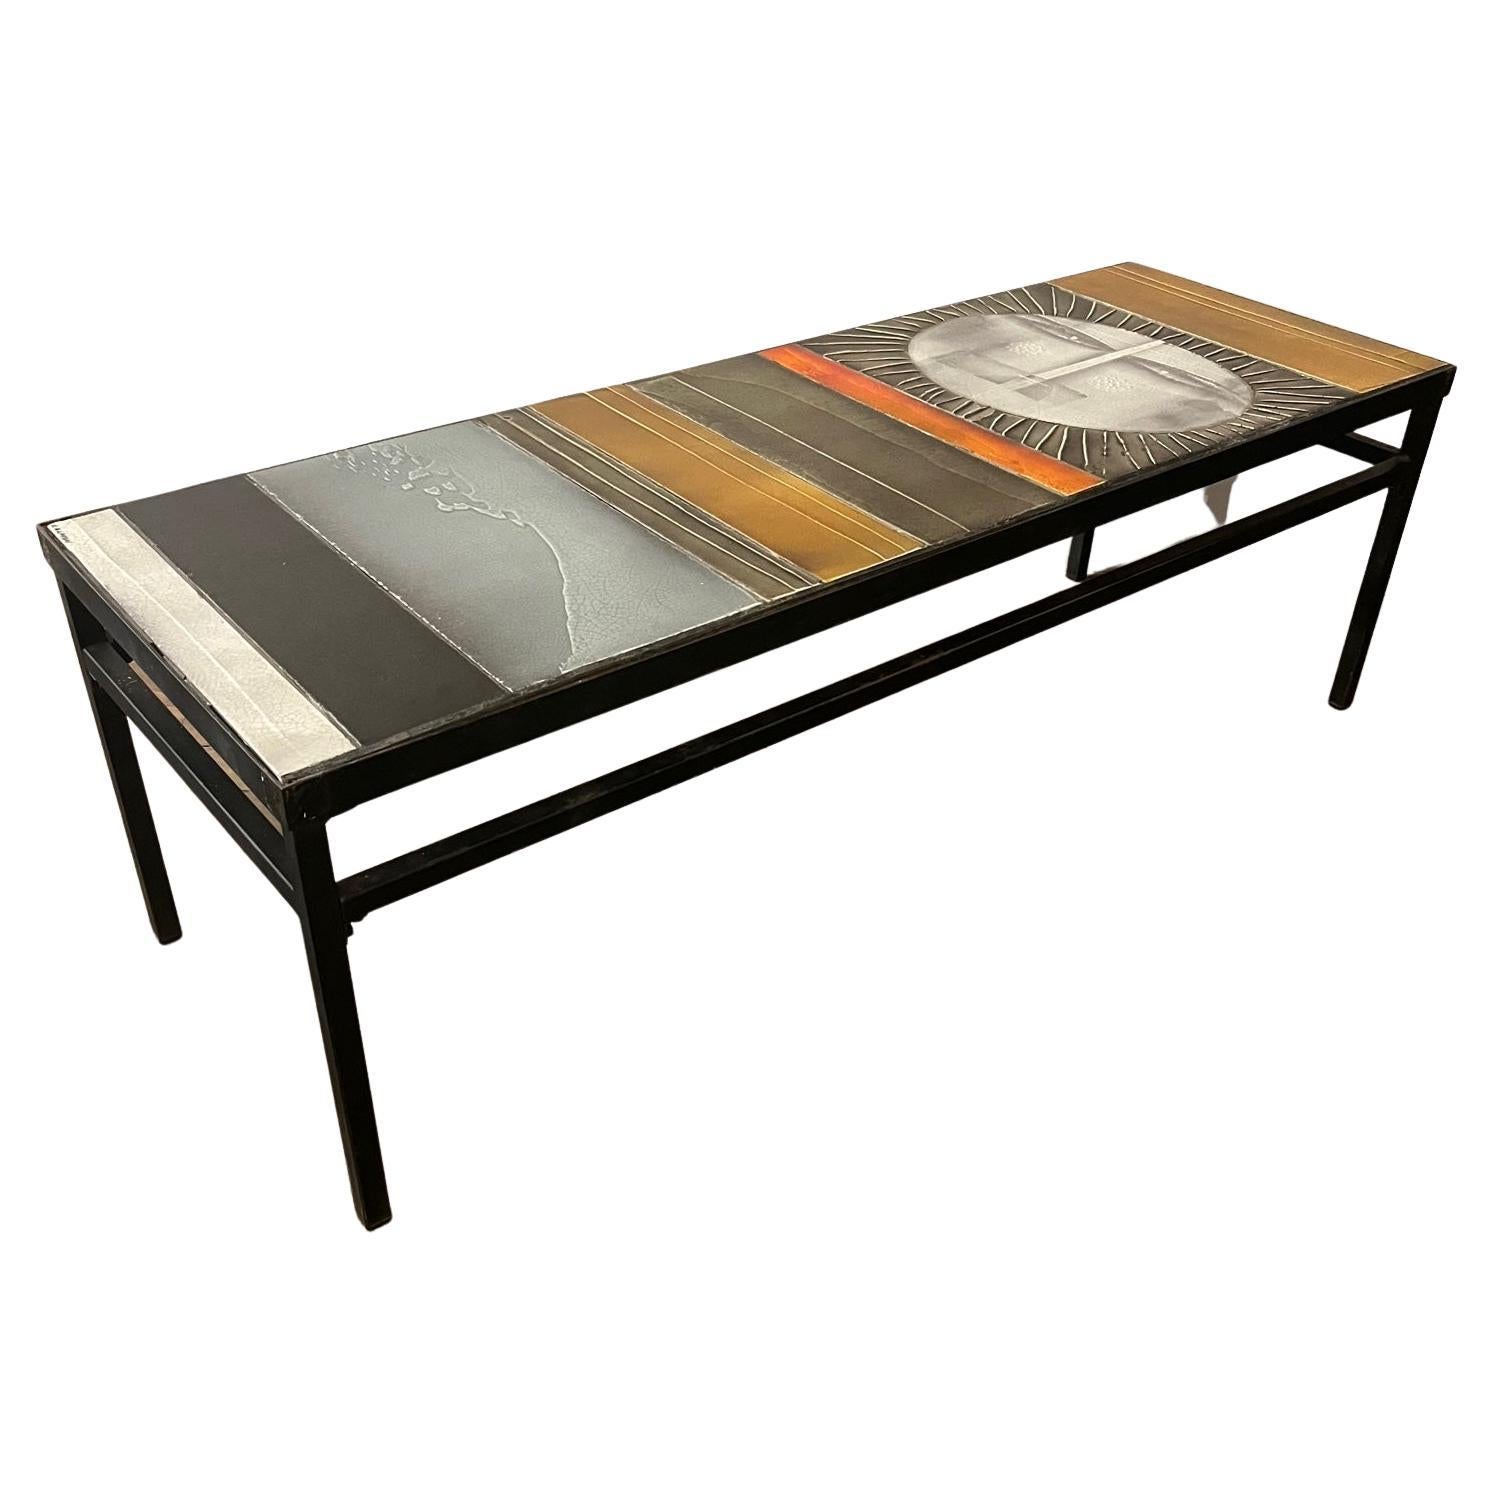 Ceramic Coffee Table "Soleil" by Roger Capron, Vallauris, France, 1960s For Sale